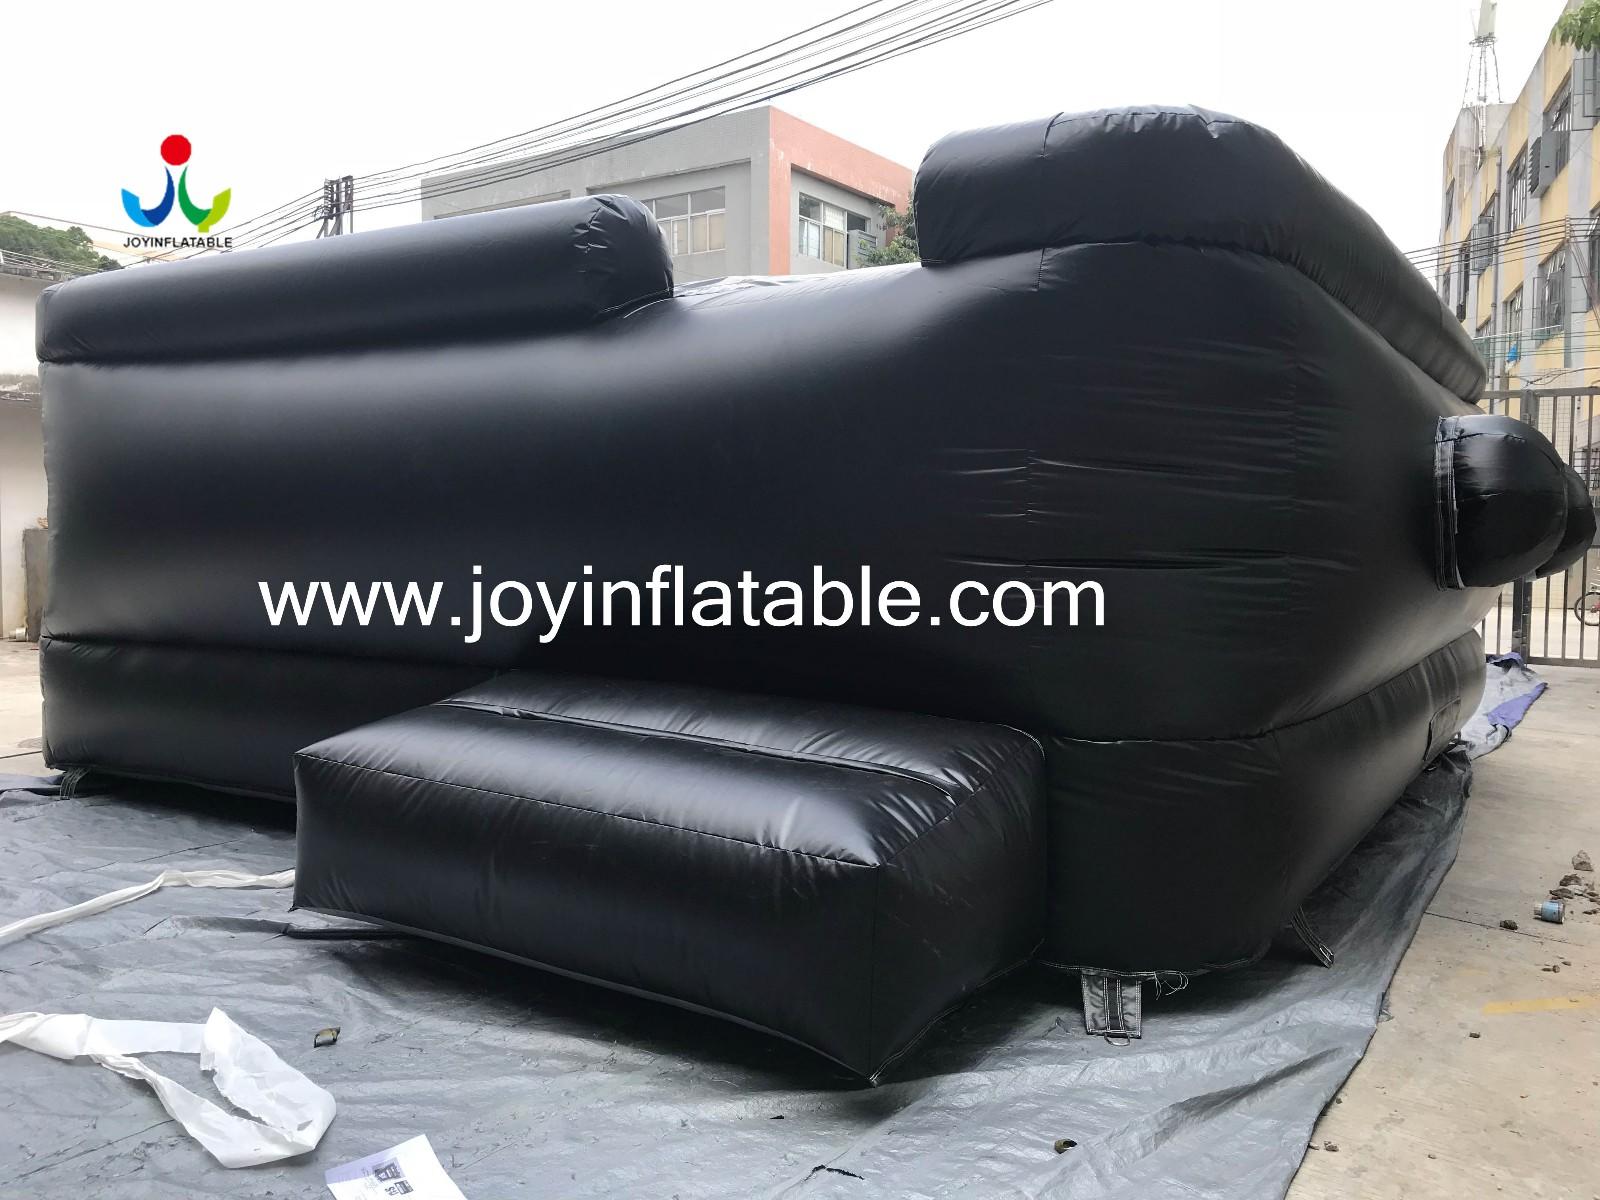 JOY inflatable Top bag jump airbag price supply for high jump training